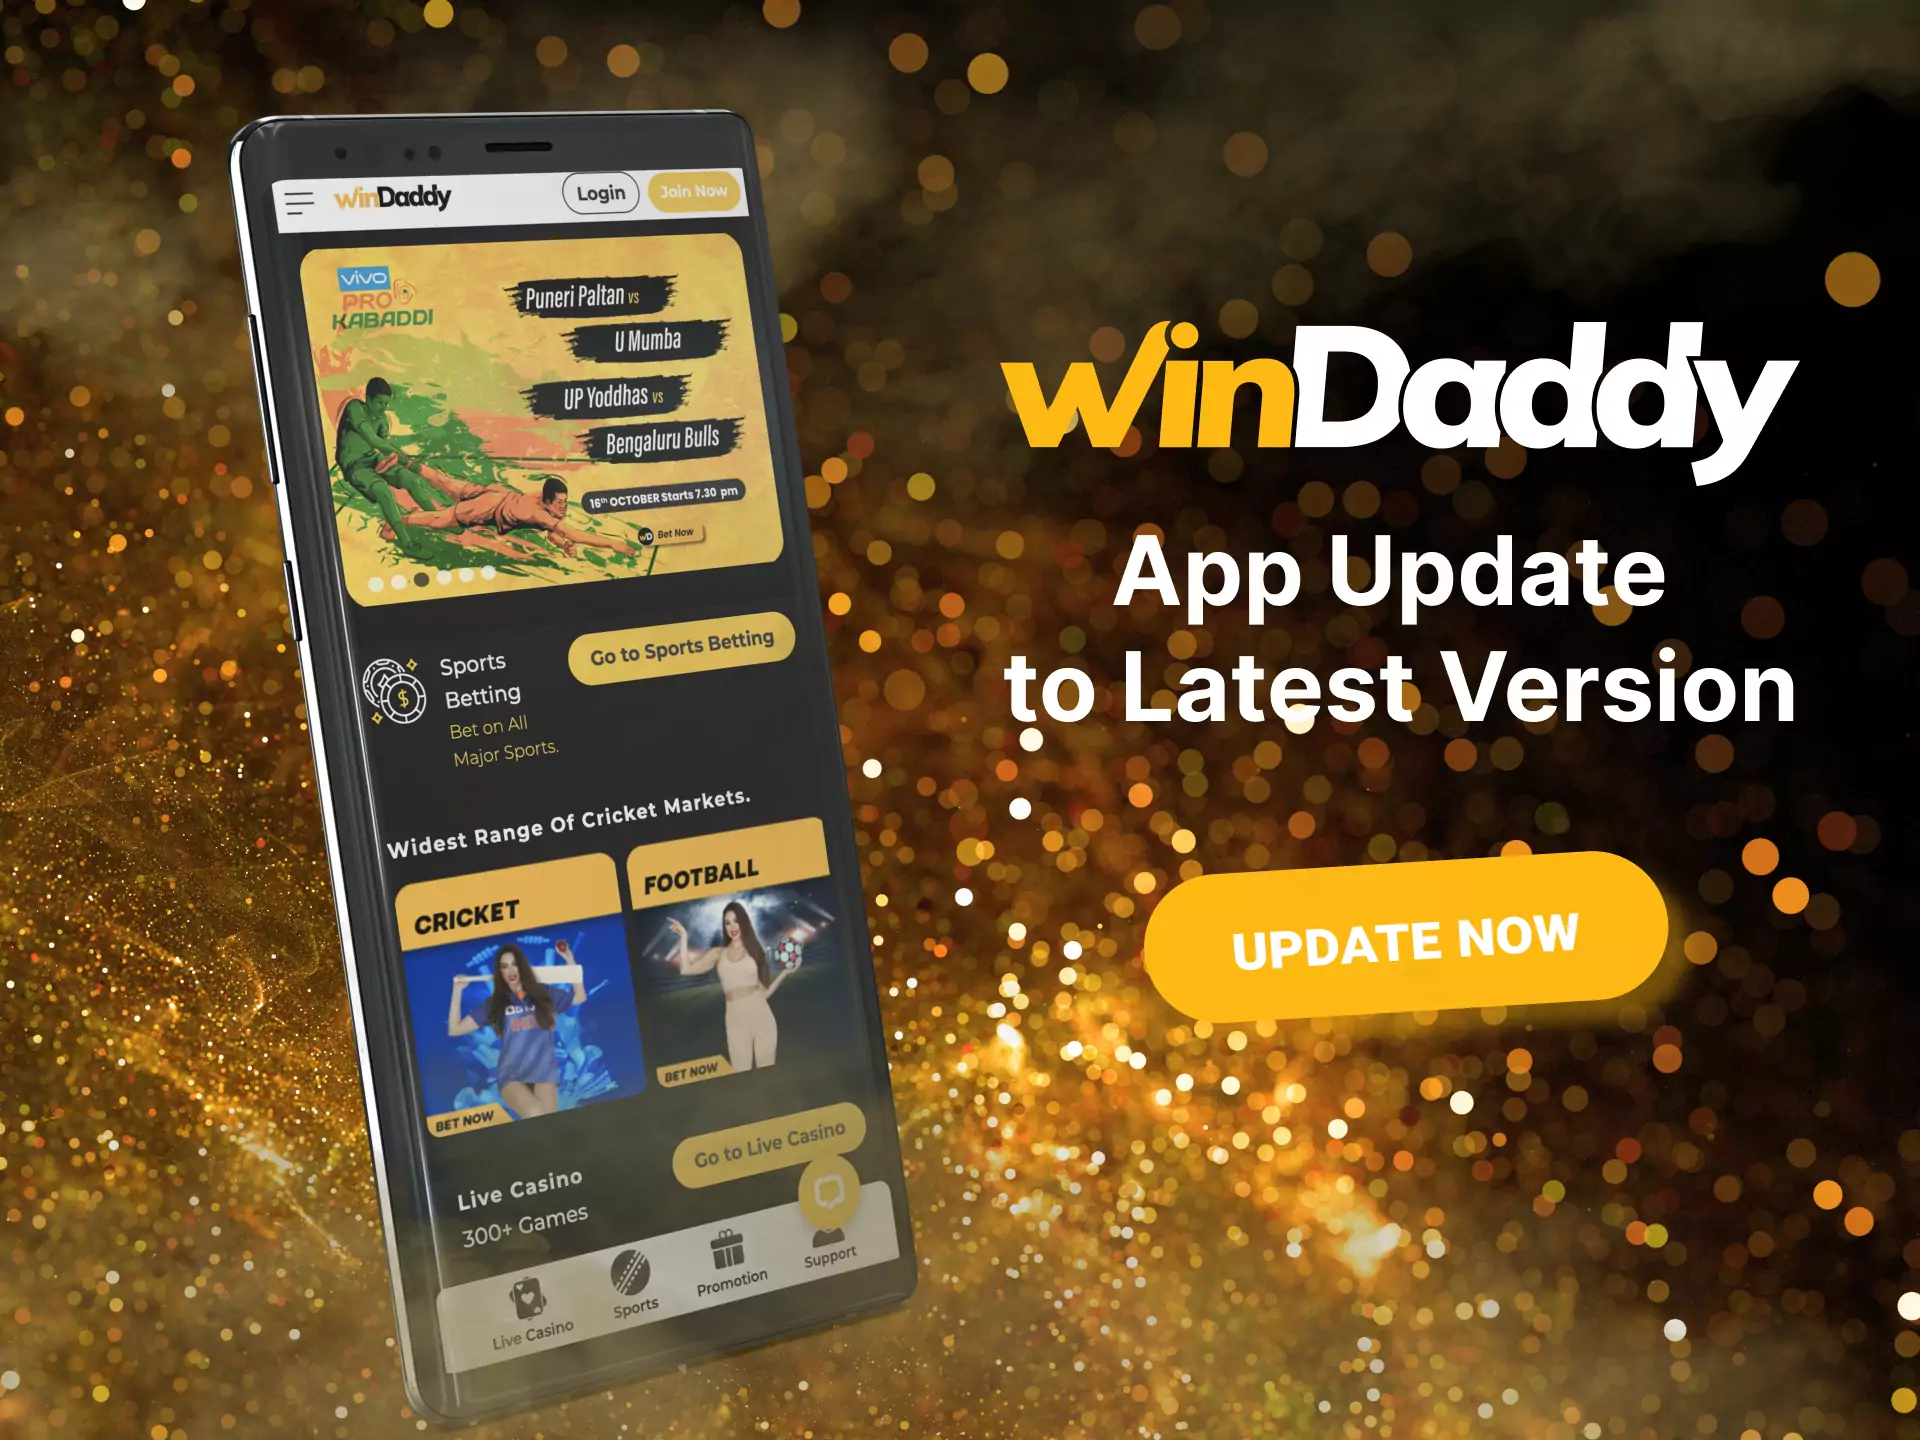 On the Windaddy website, no updates are needed.